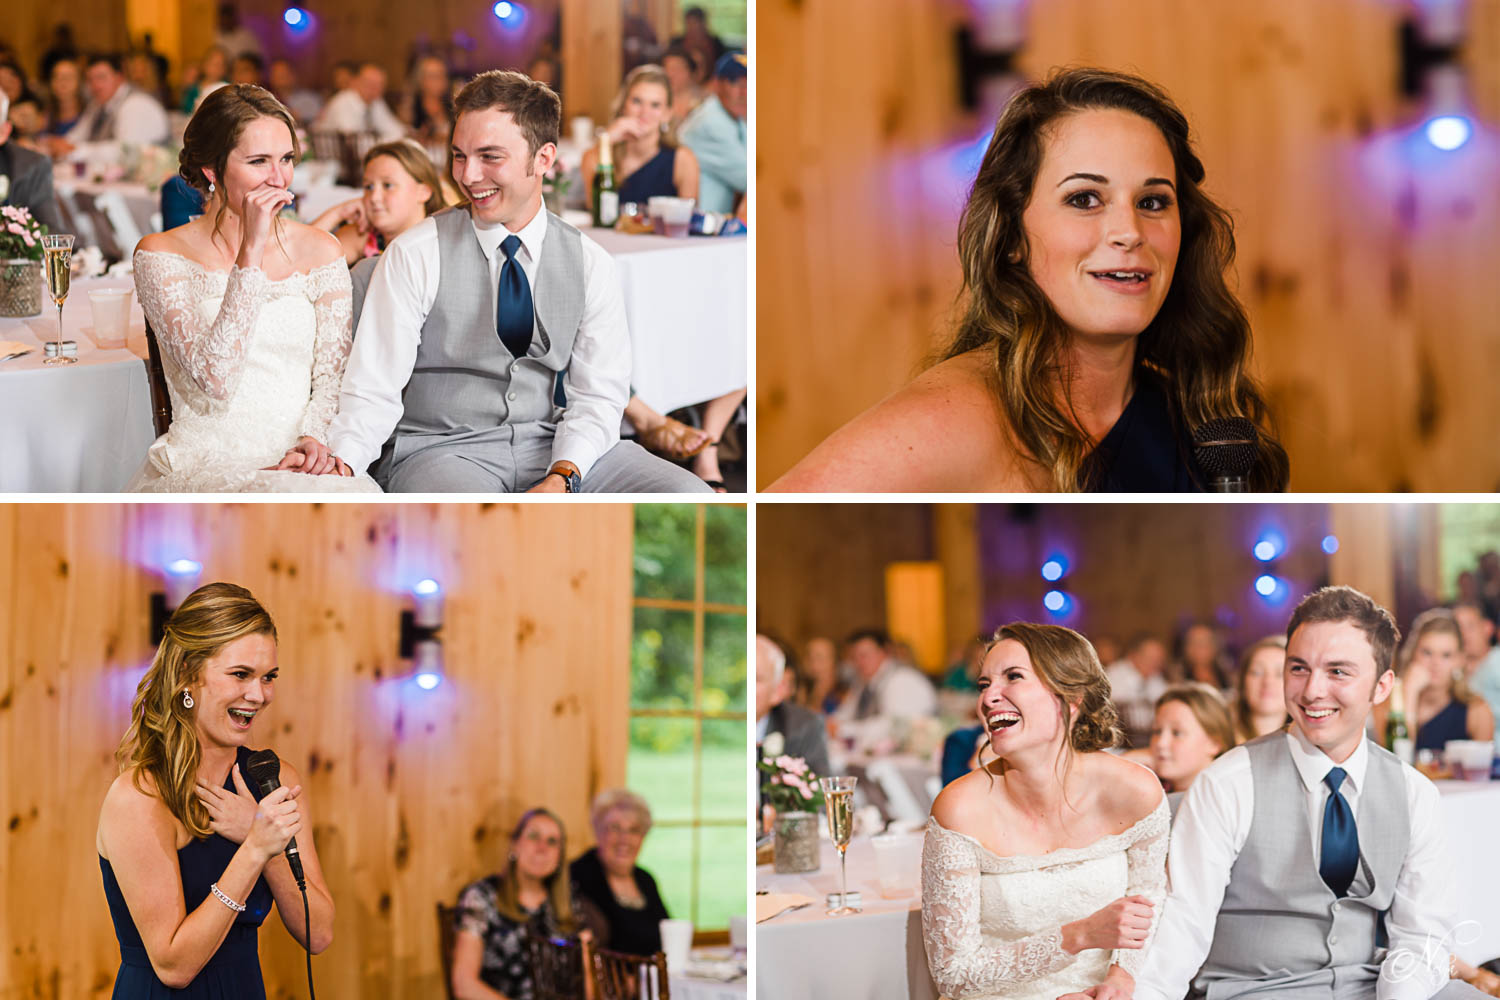 bride and groom's reaction to toasts from college frinds from ETSU at their wedding reception.